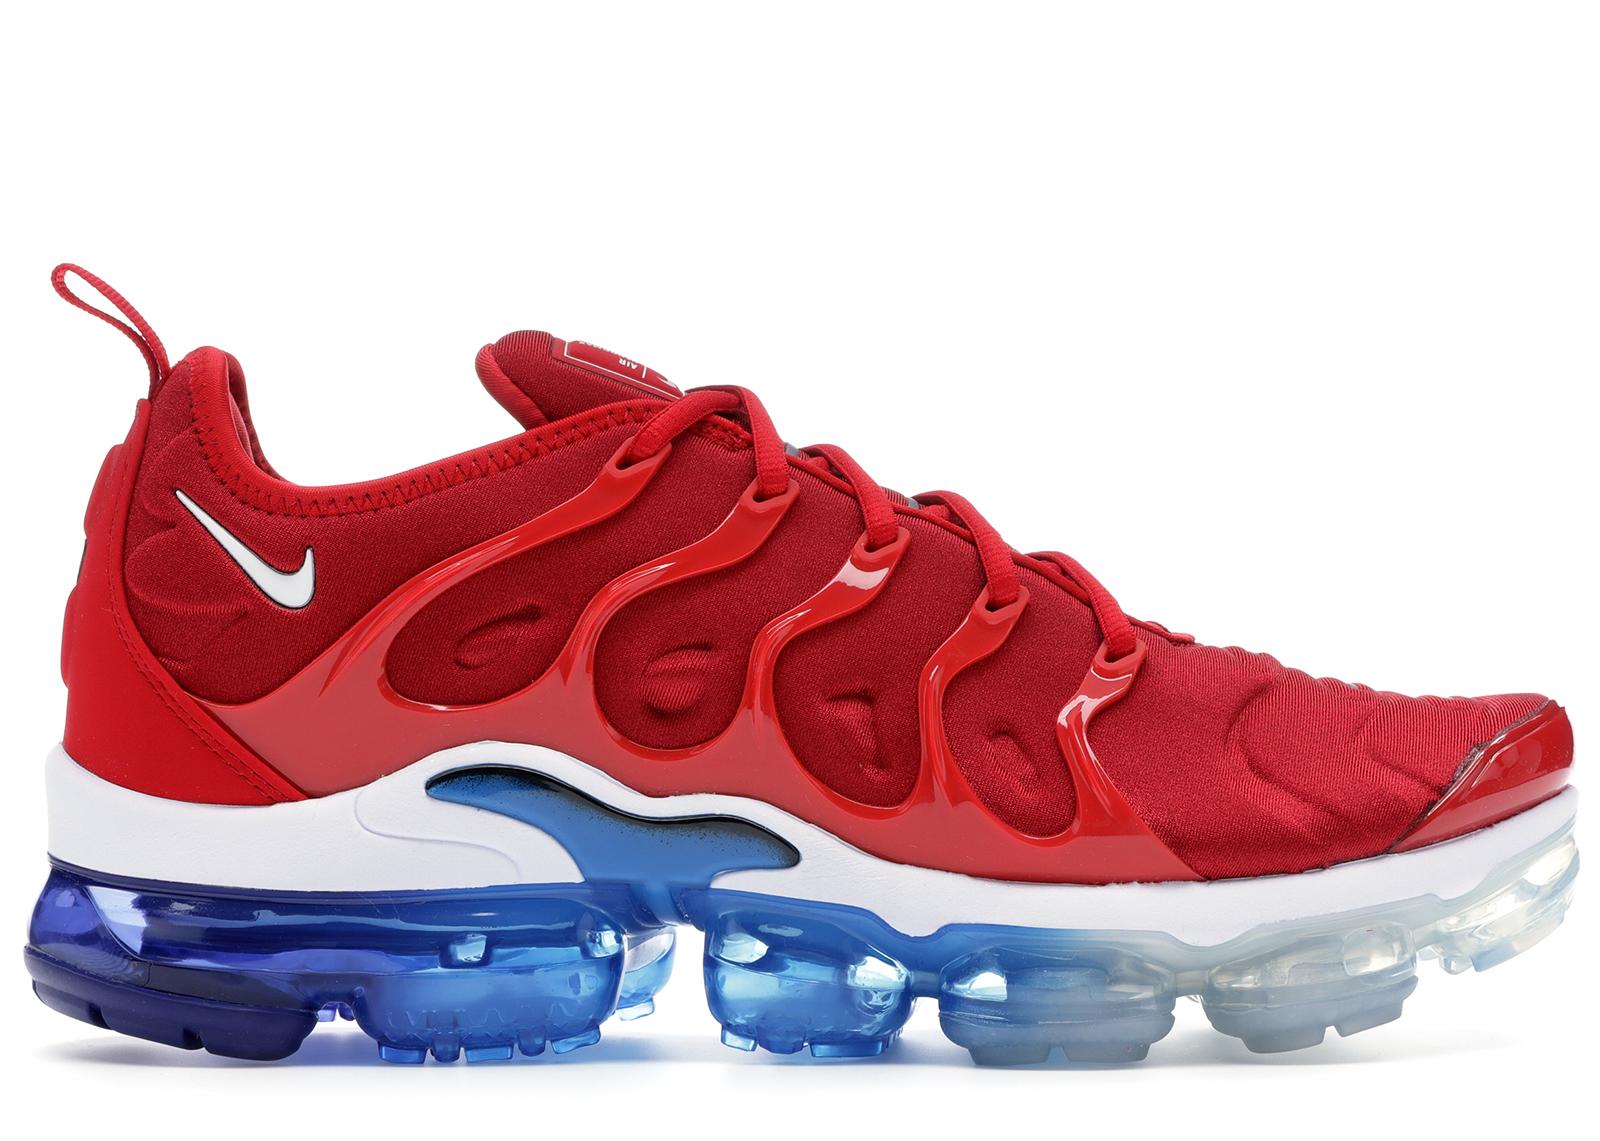 Nike Air Vapormax Plus Fitness Shoes in Red for Men - Save 56% - Lyst